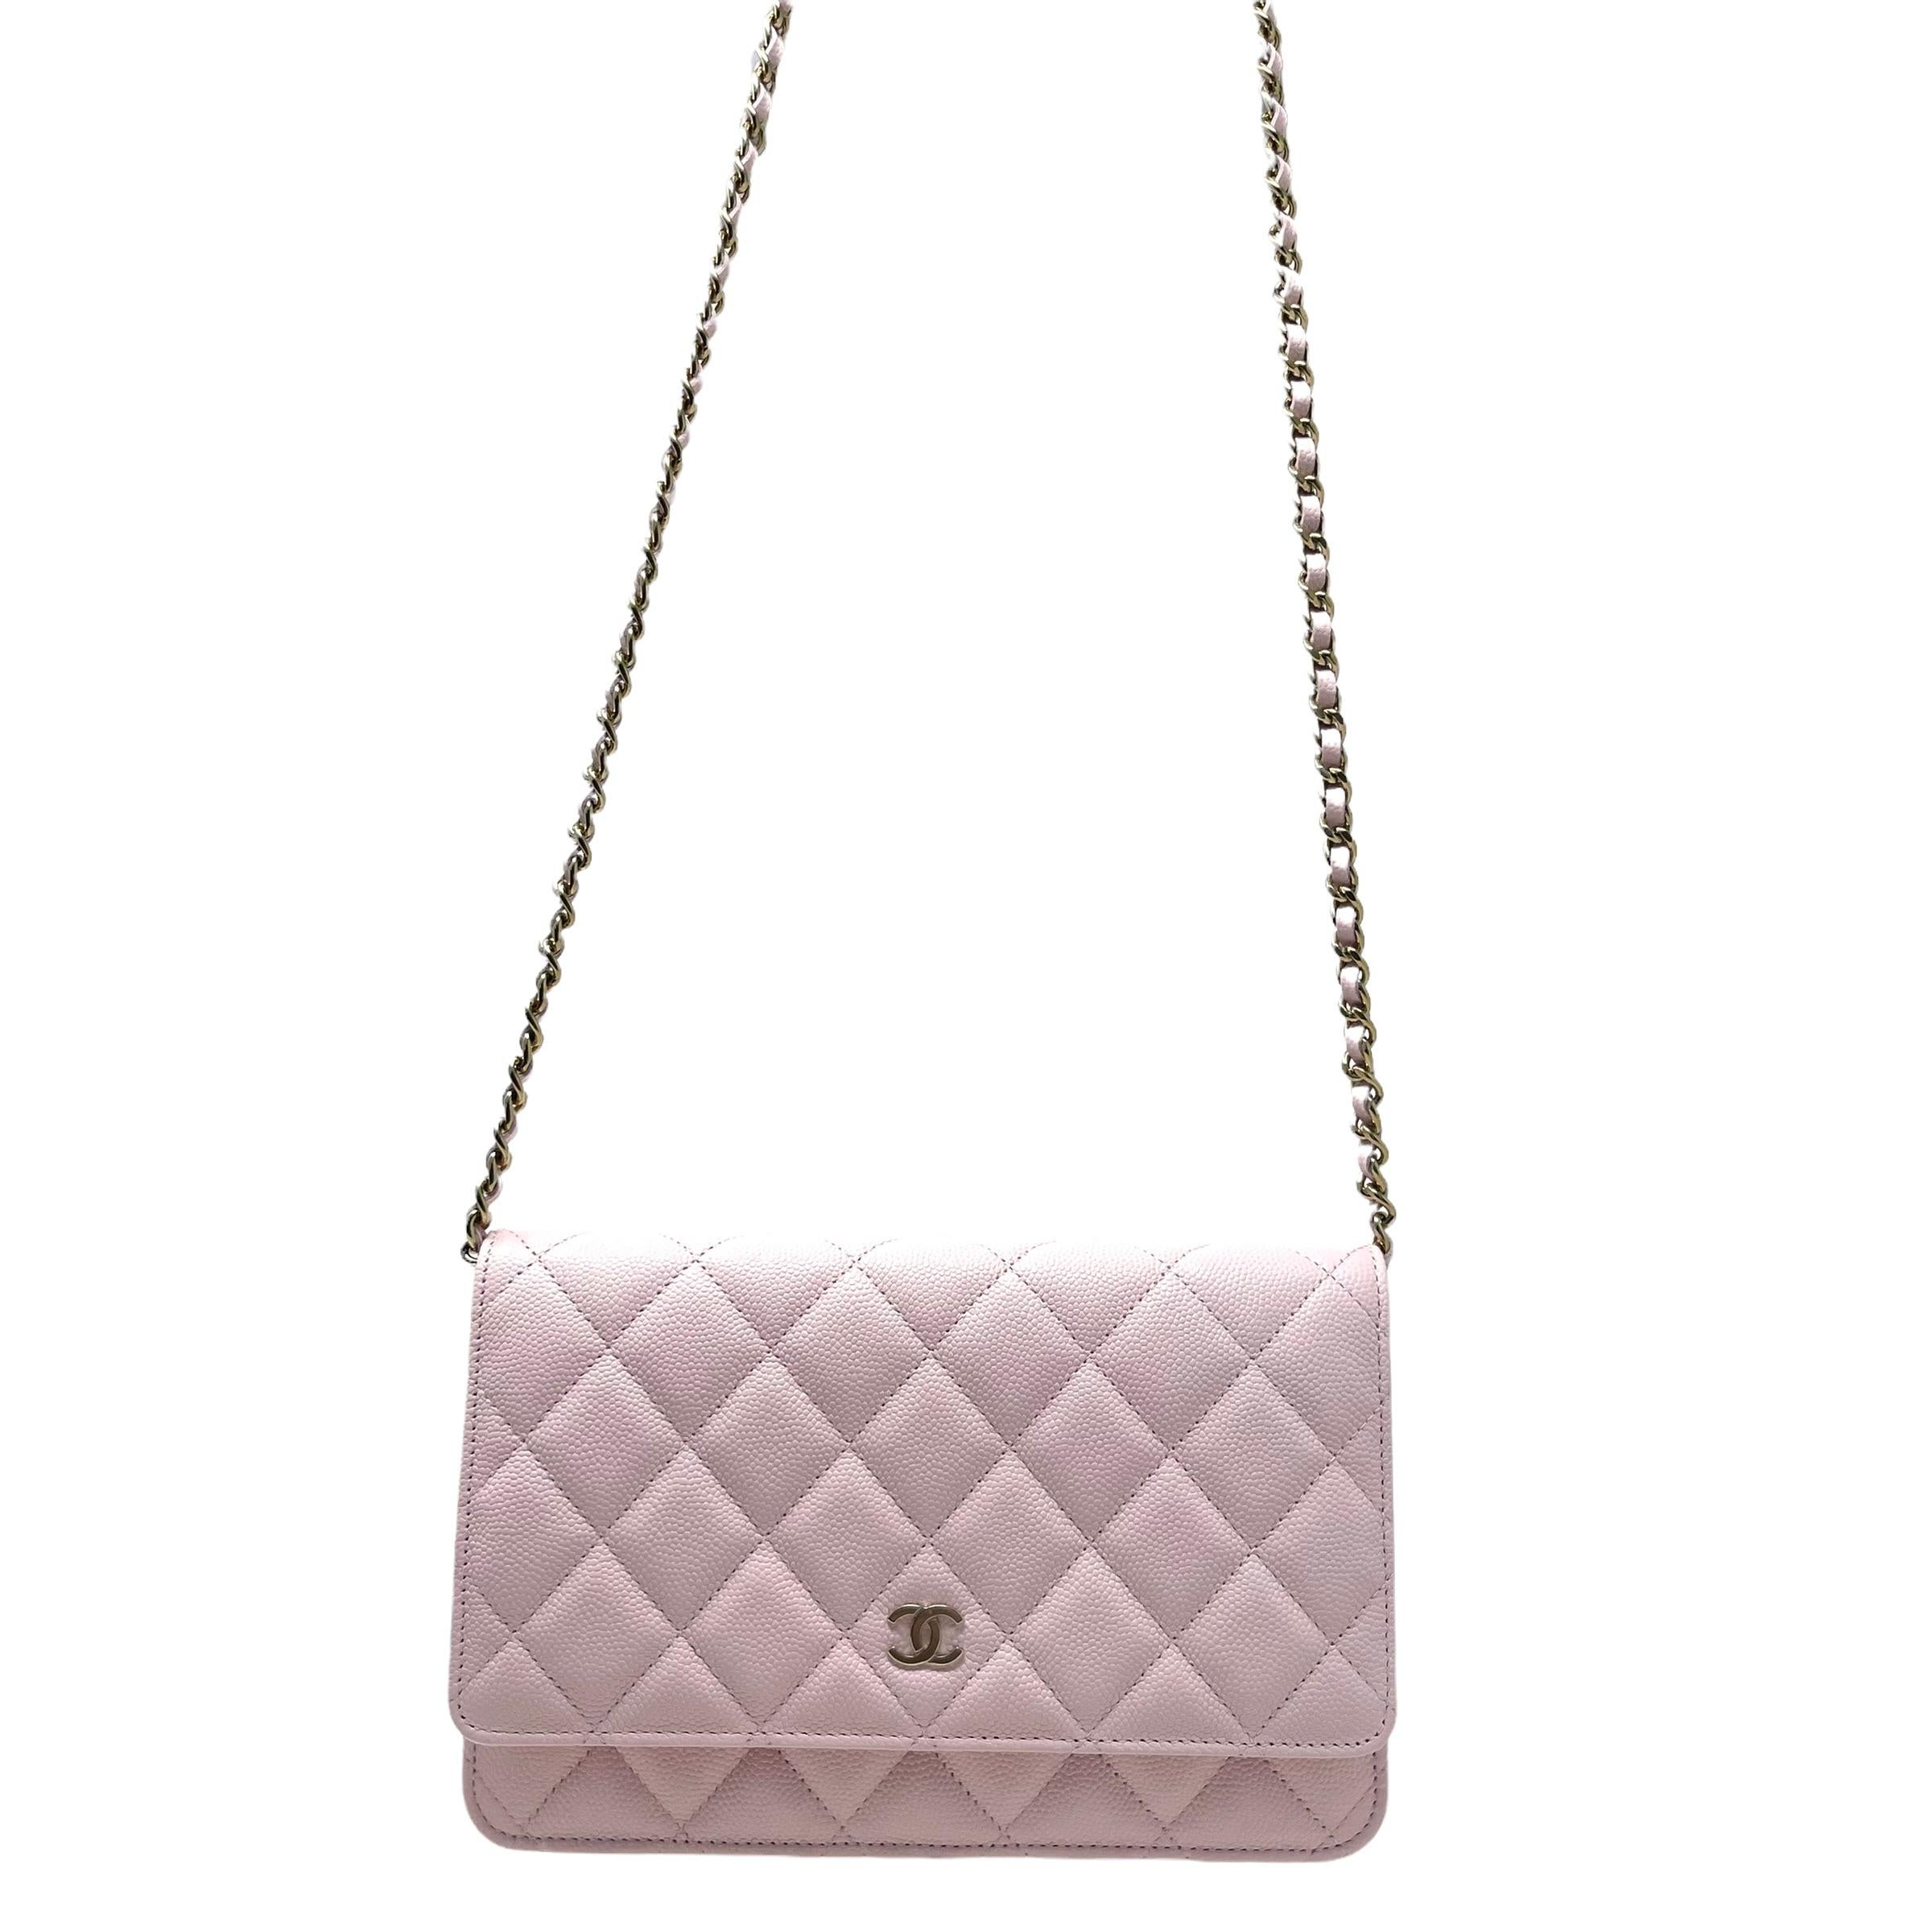 NEW Chanel Light Pink Classic Quilted Caviar Leather WOC Crossbody Bag ...